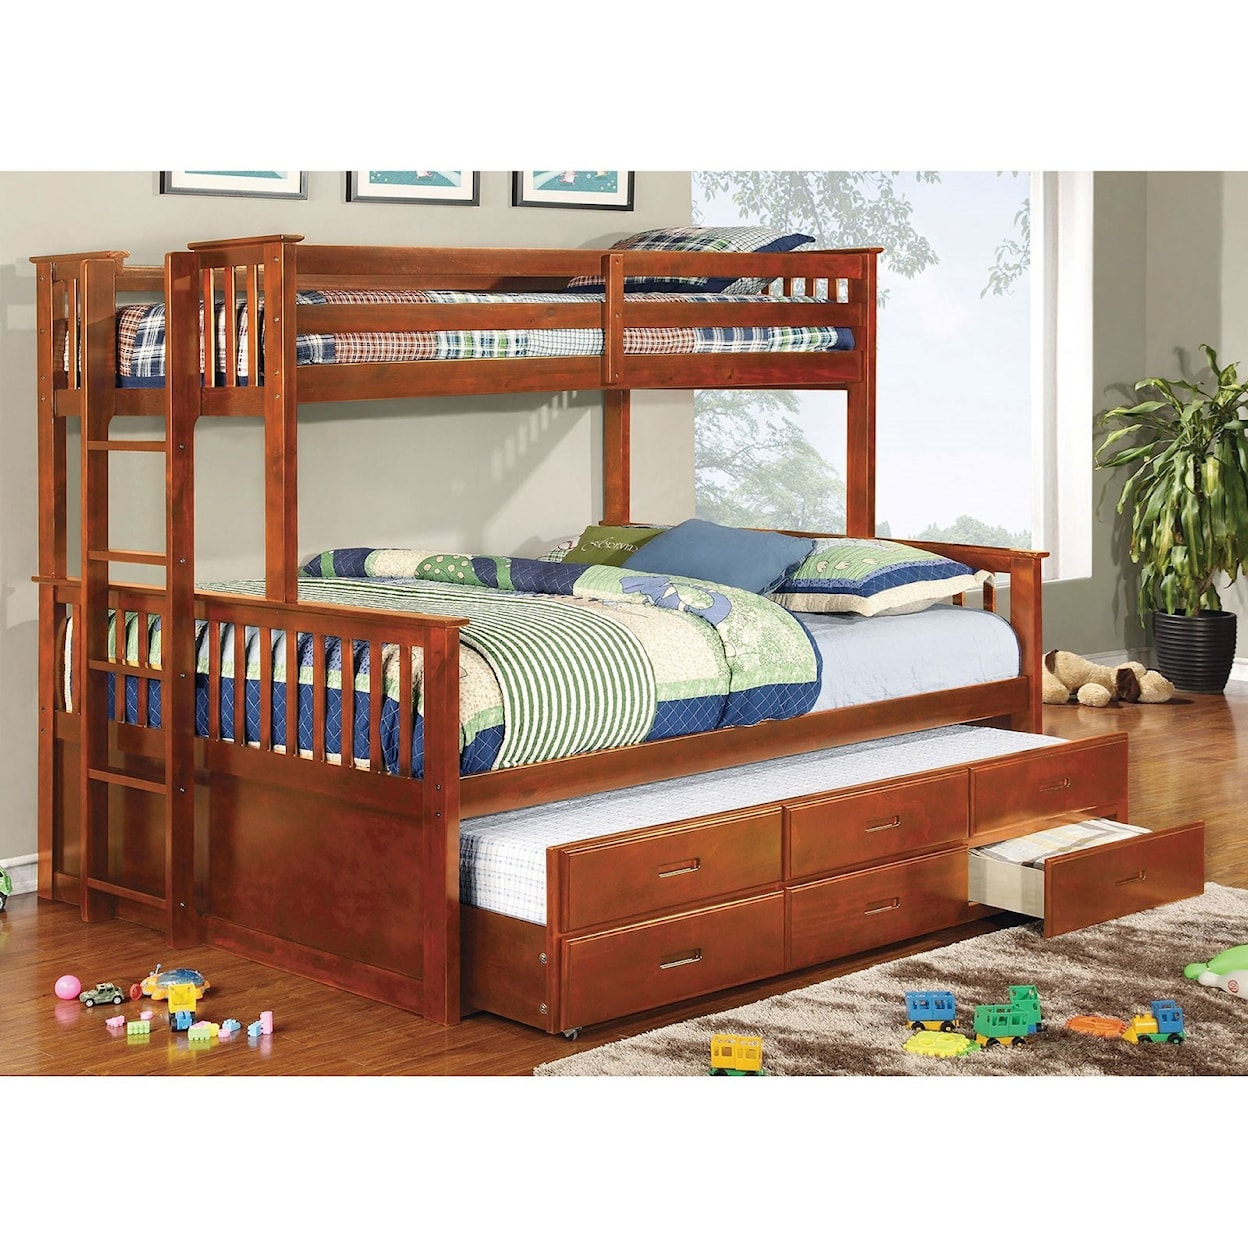 FUSA University Twin-over-Queen Bunk Bed and Trundle